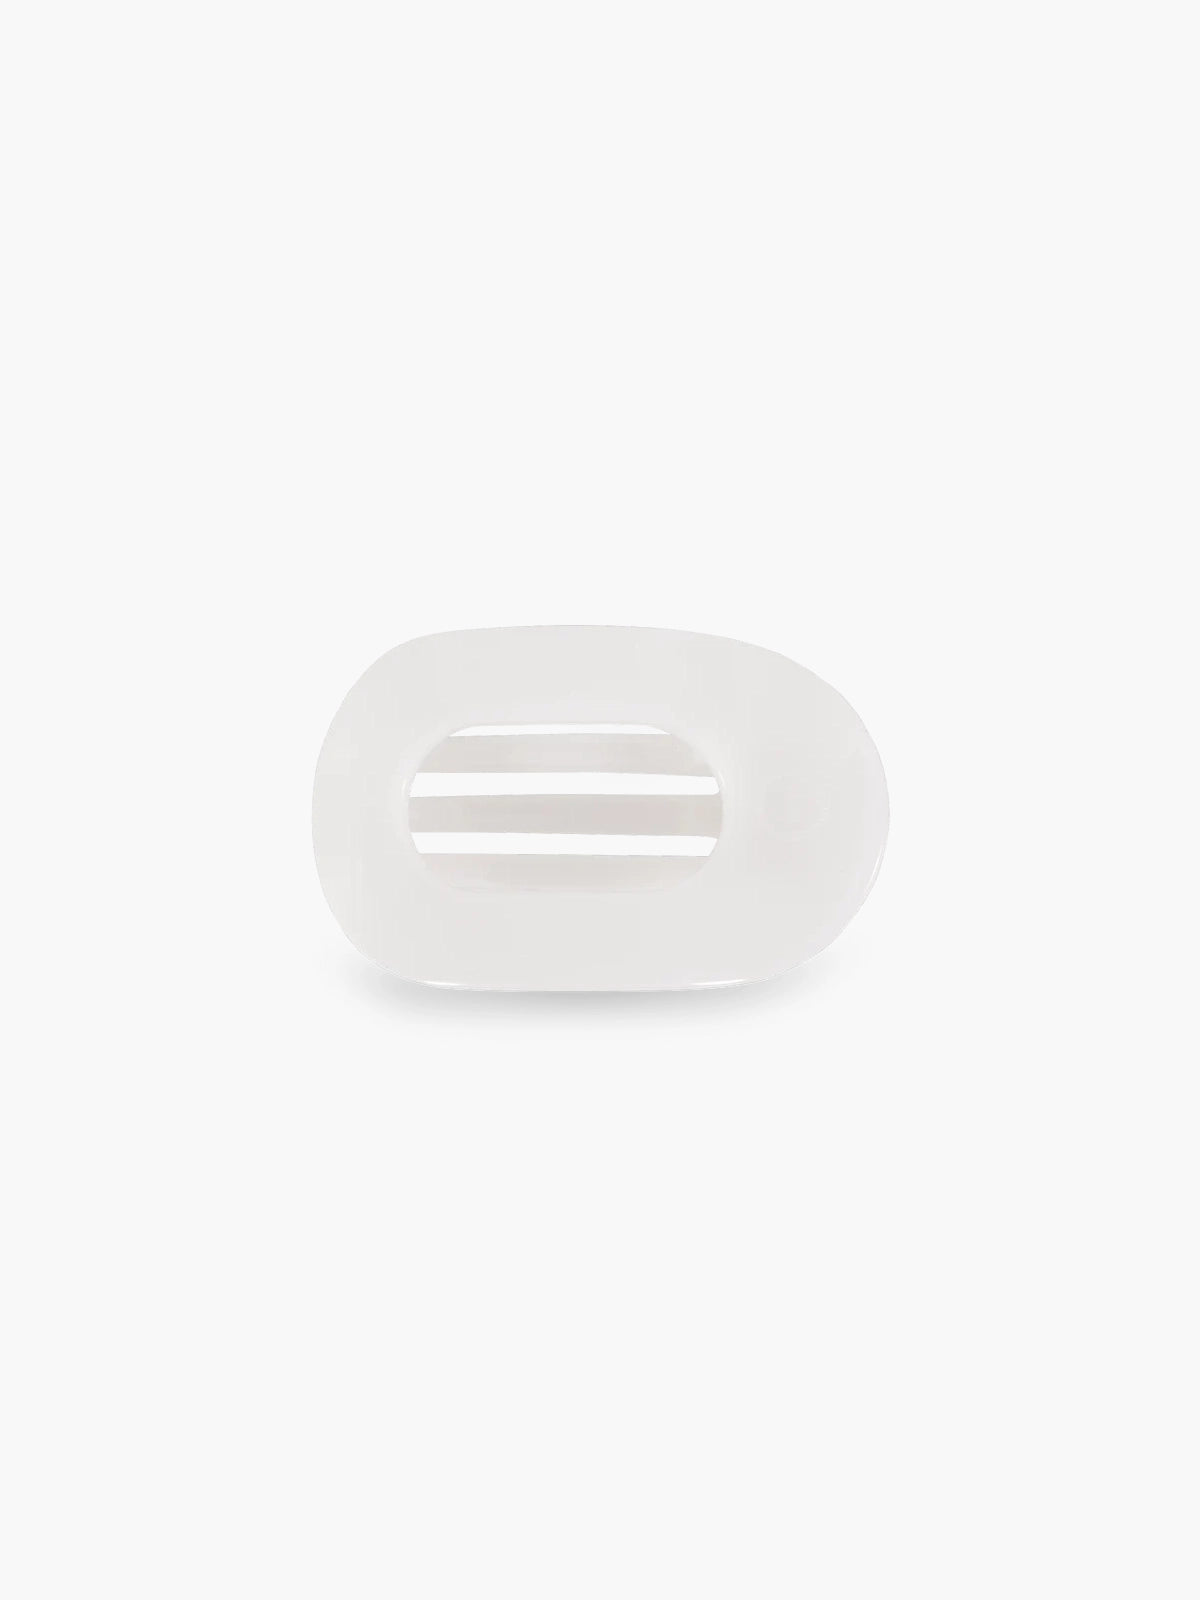 teleties small flat round hair clip in coconut white